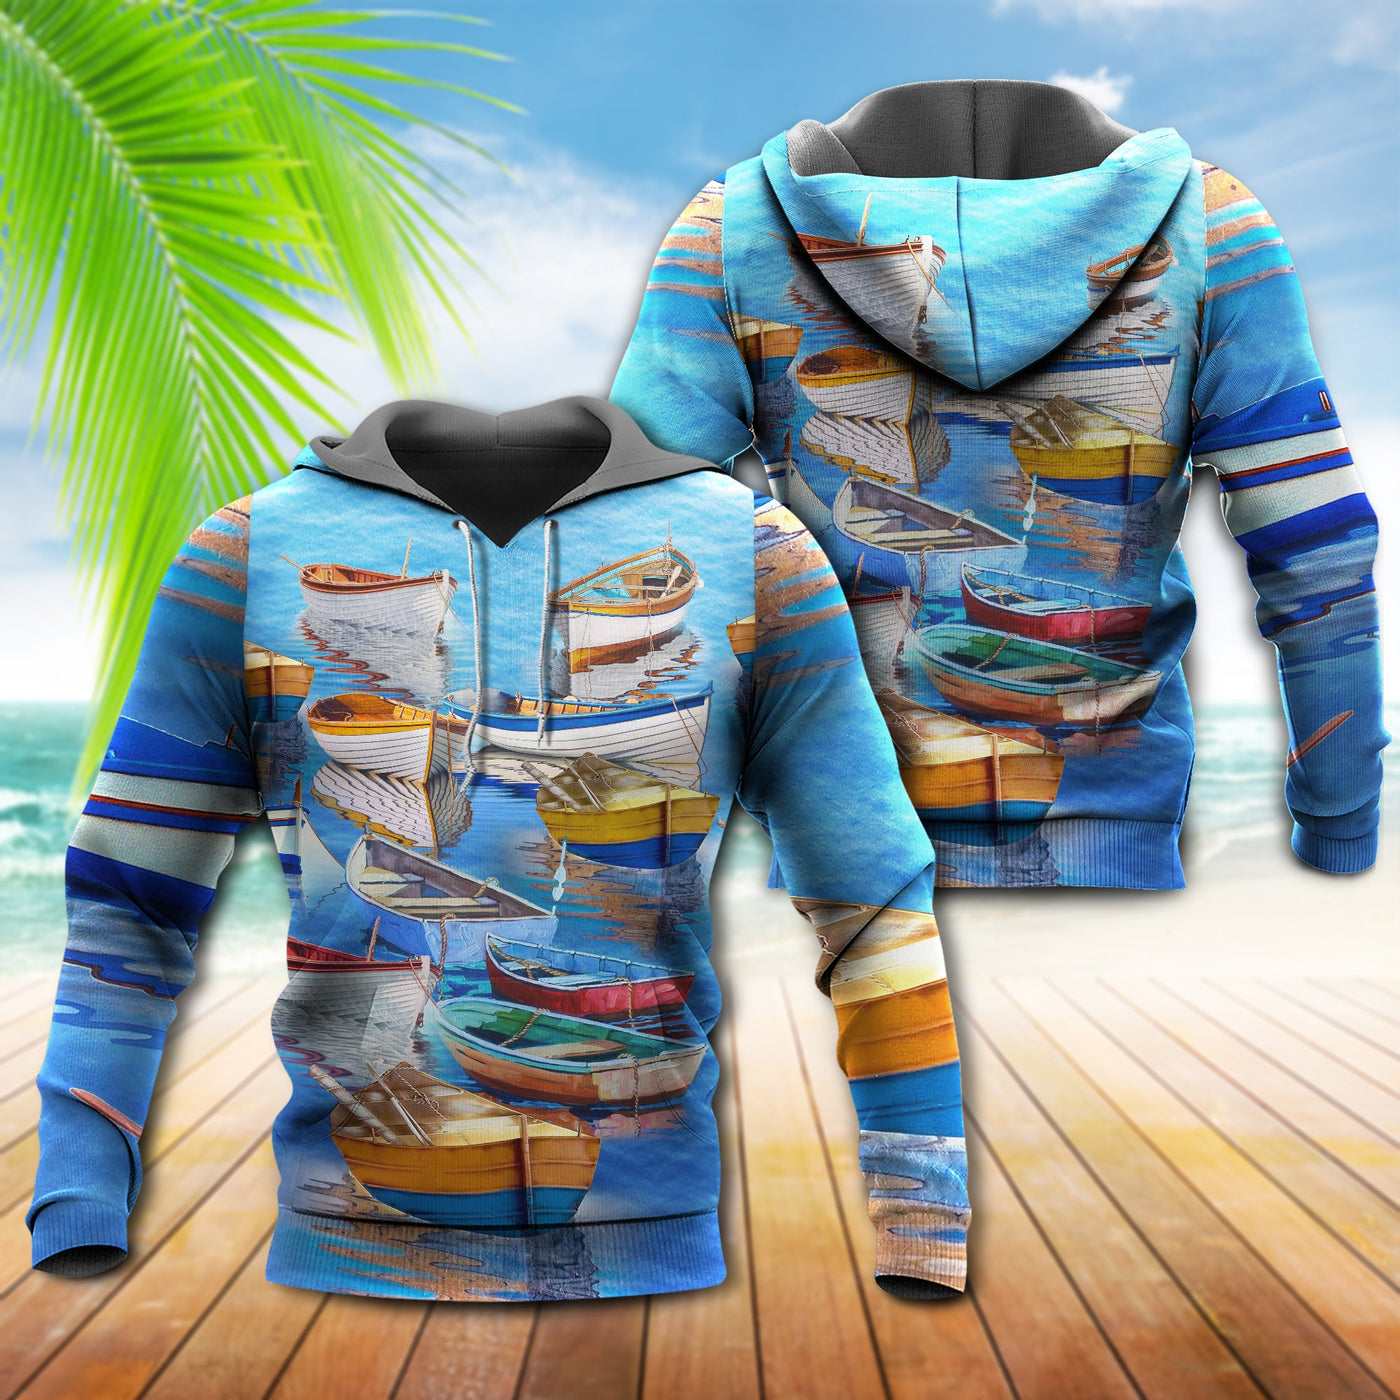 Boat Life Is Better On The Boat - Hoodie - Owls Matrix LTD